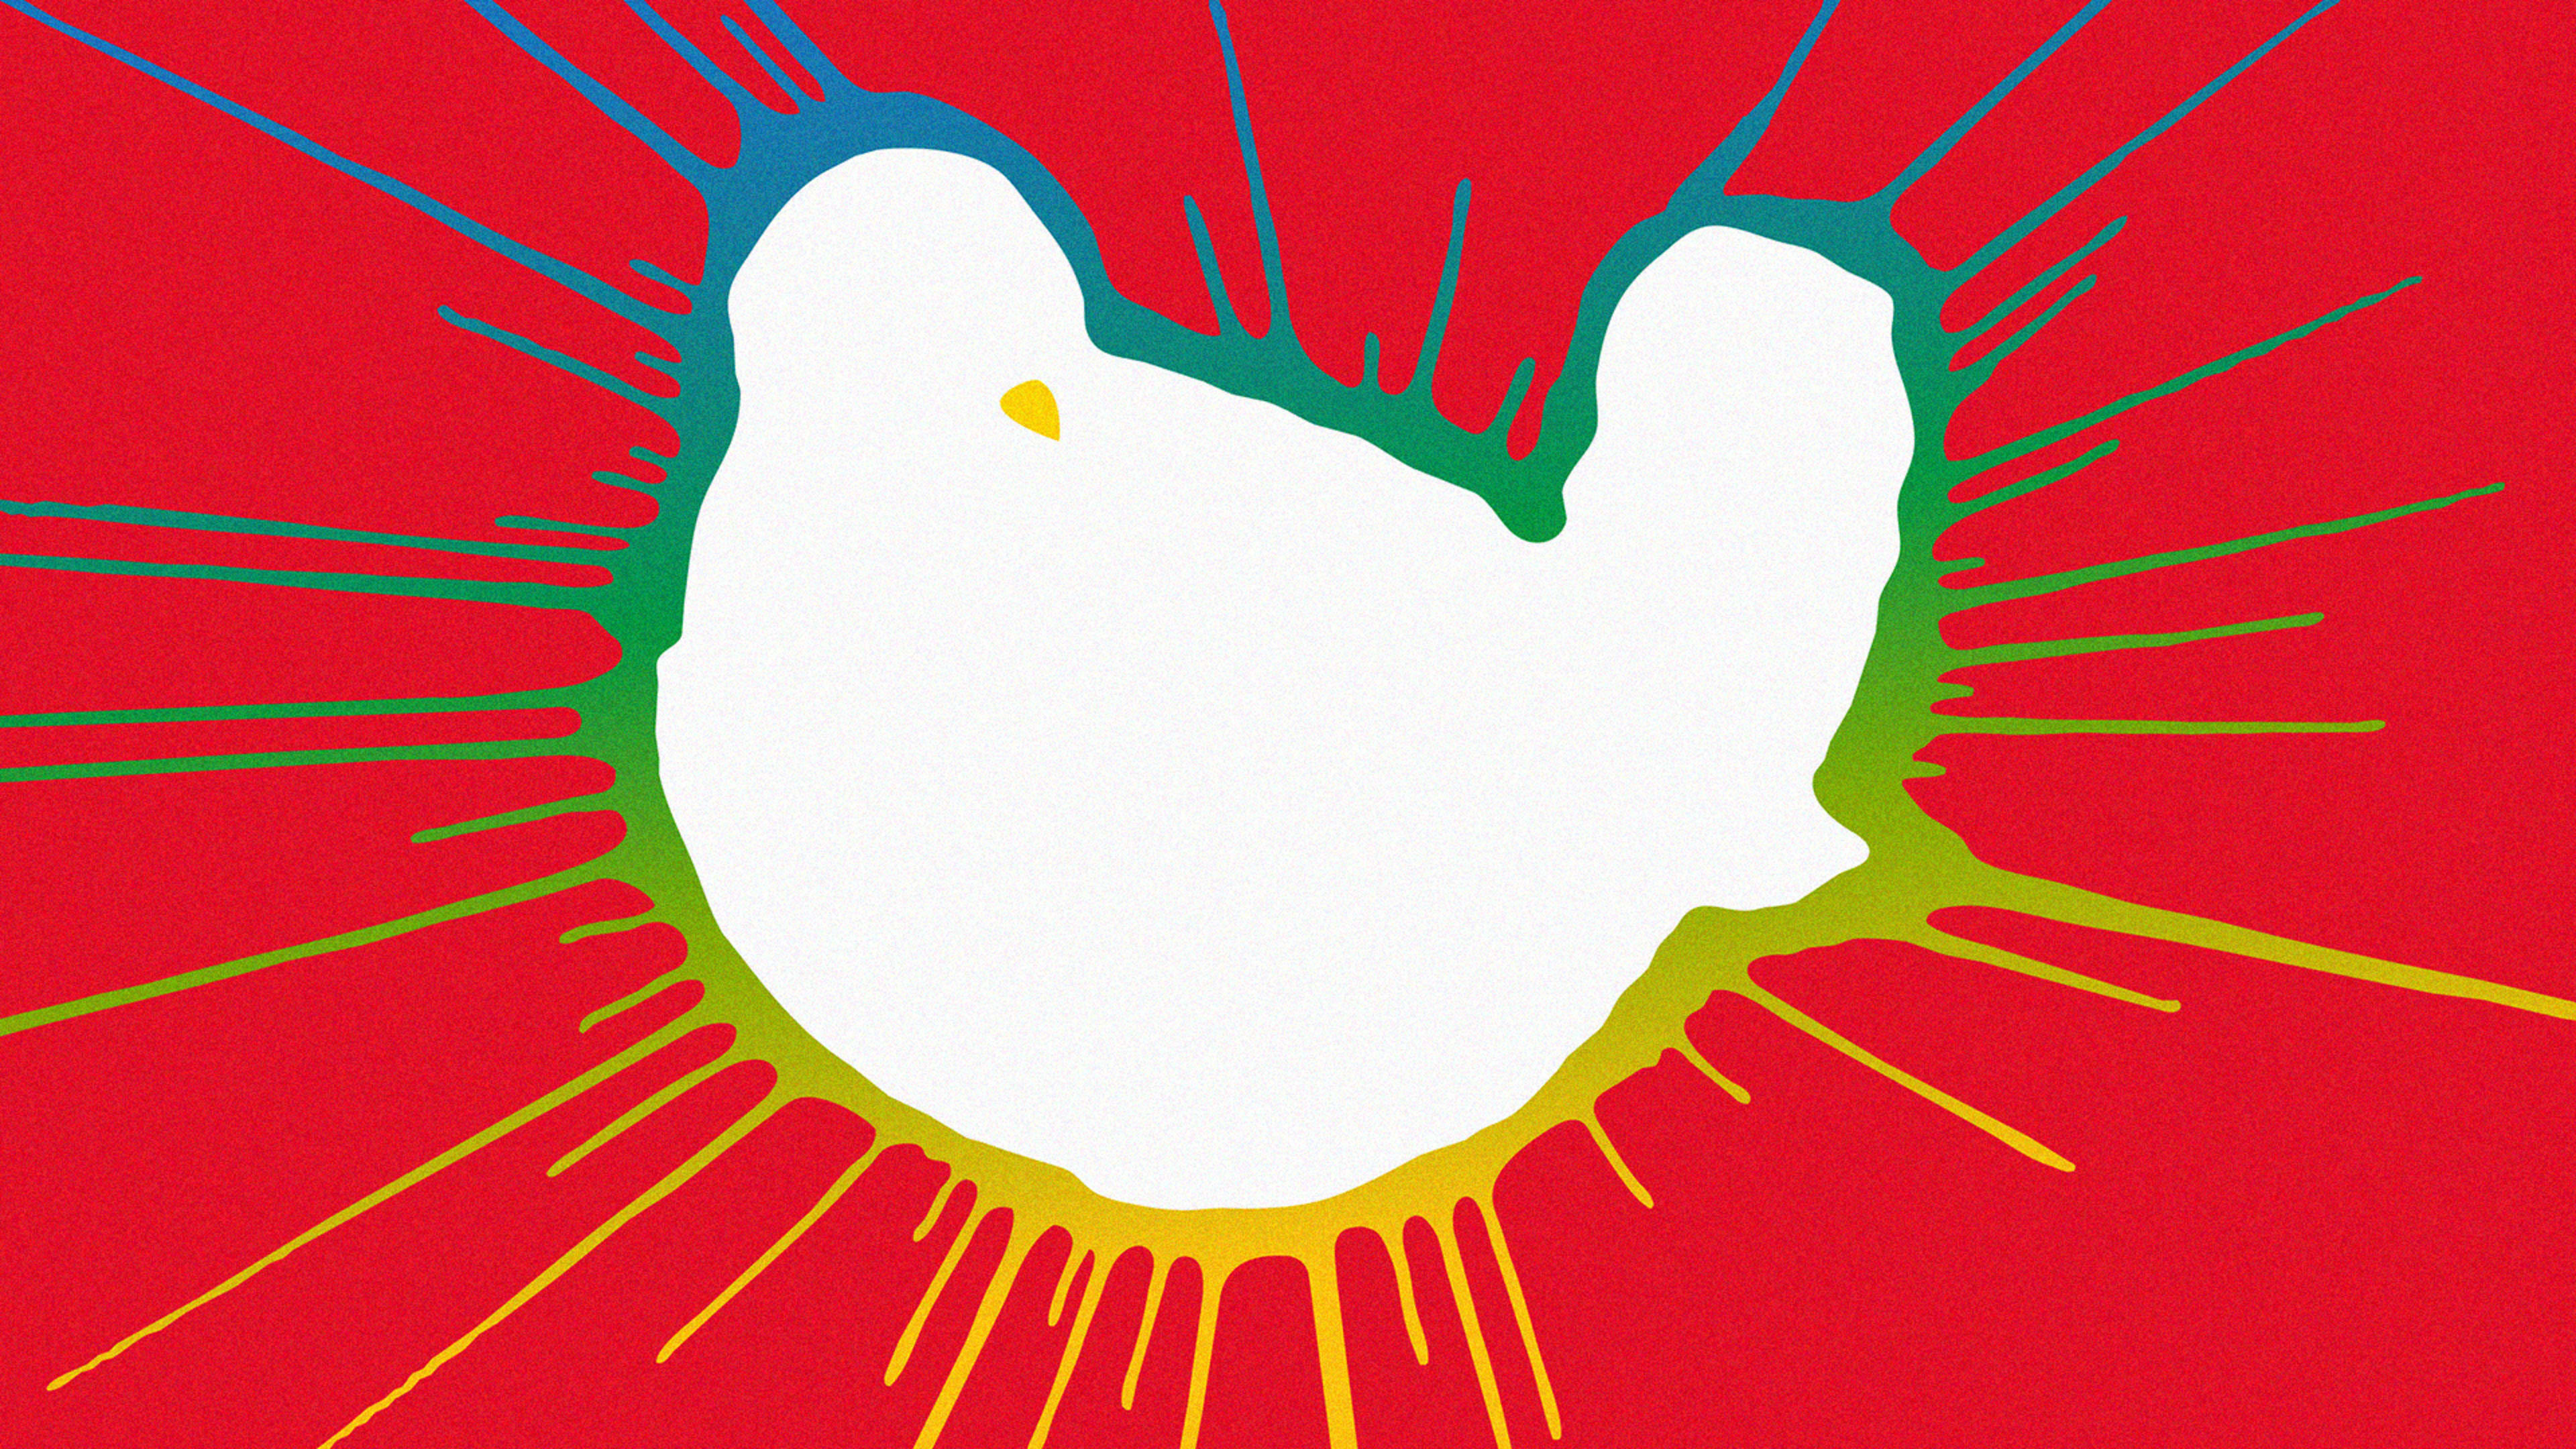 The epic, ever-evolving timeline of how Woodstock 50’s peace and love fest devolved into a financial and legal saga